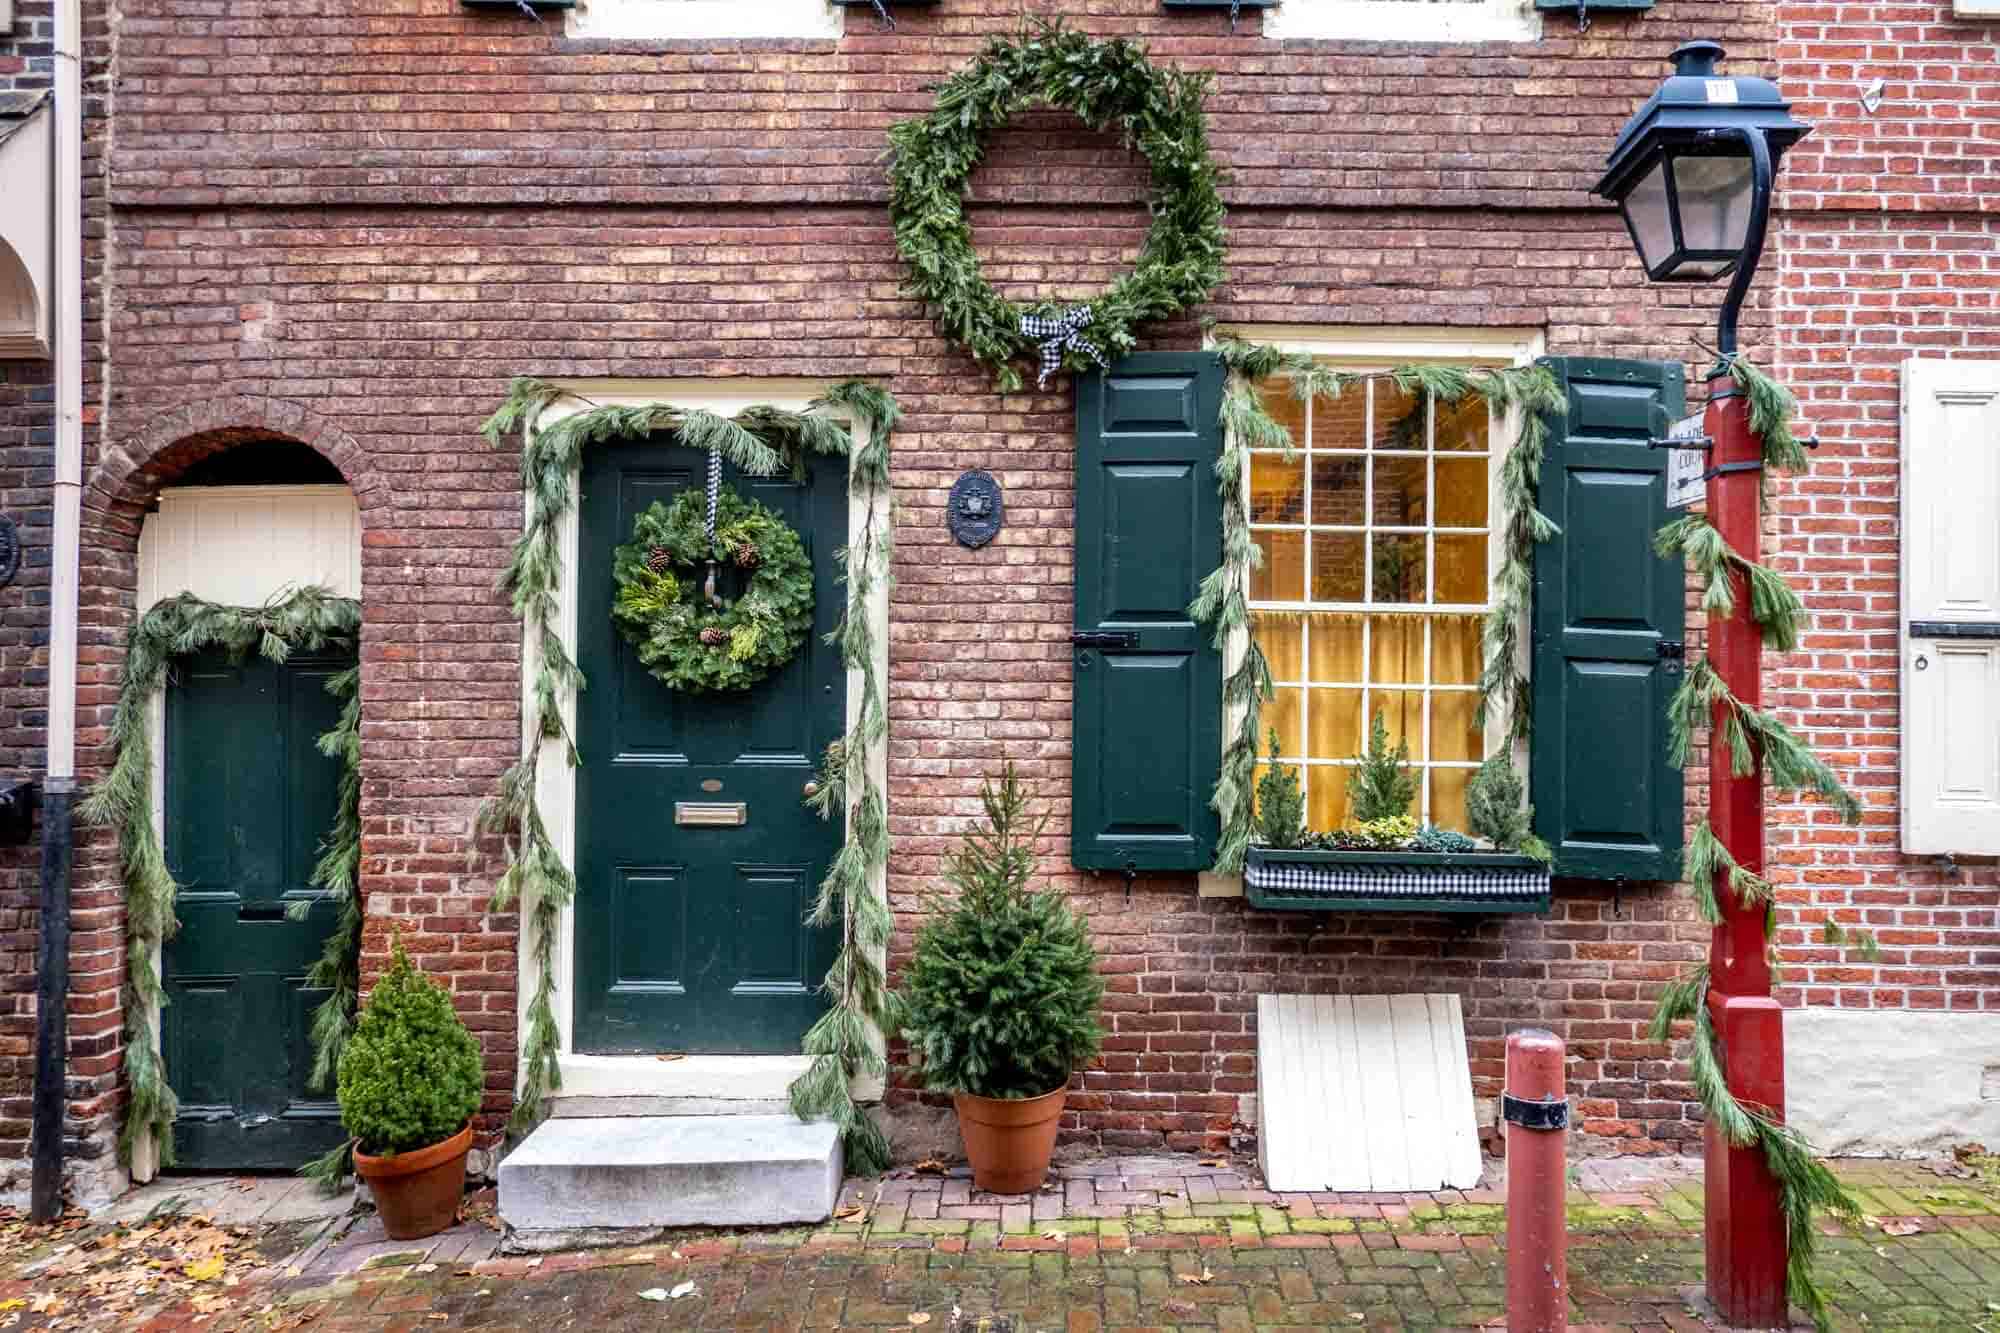 Home in Elfreth's Alley decorated with wreaths and garland